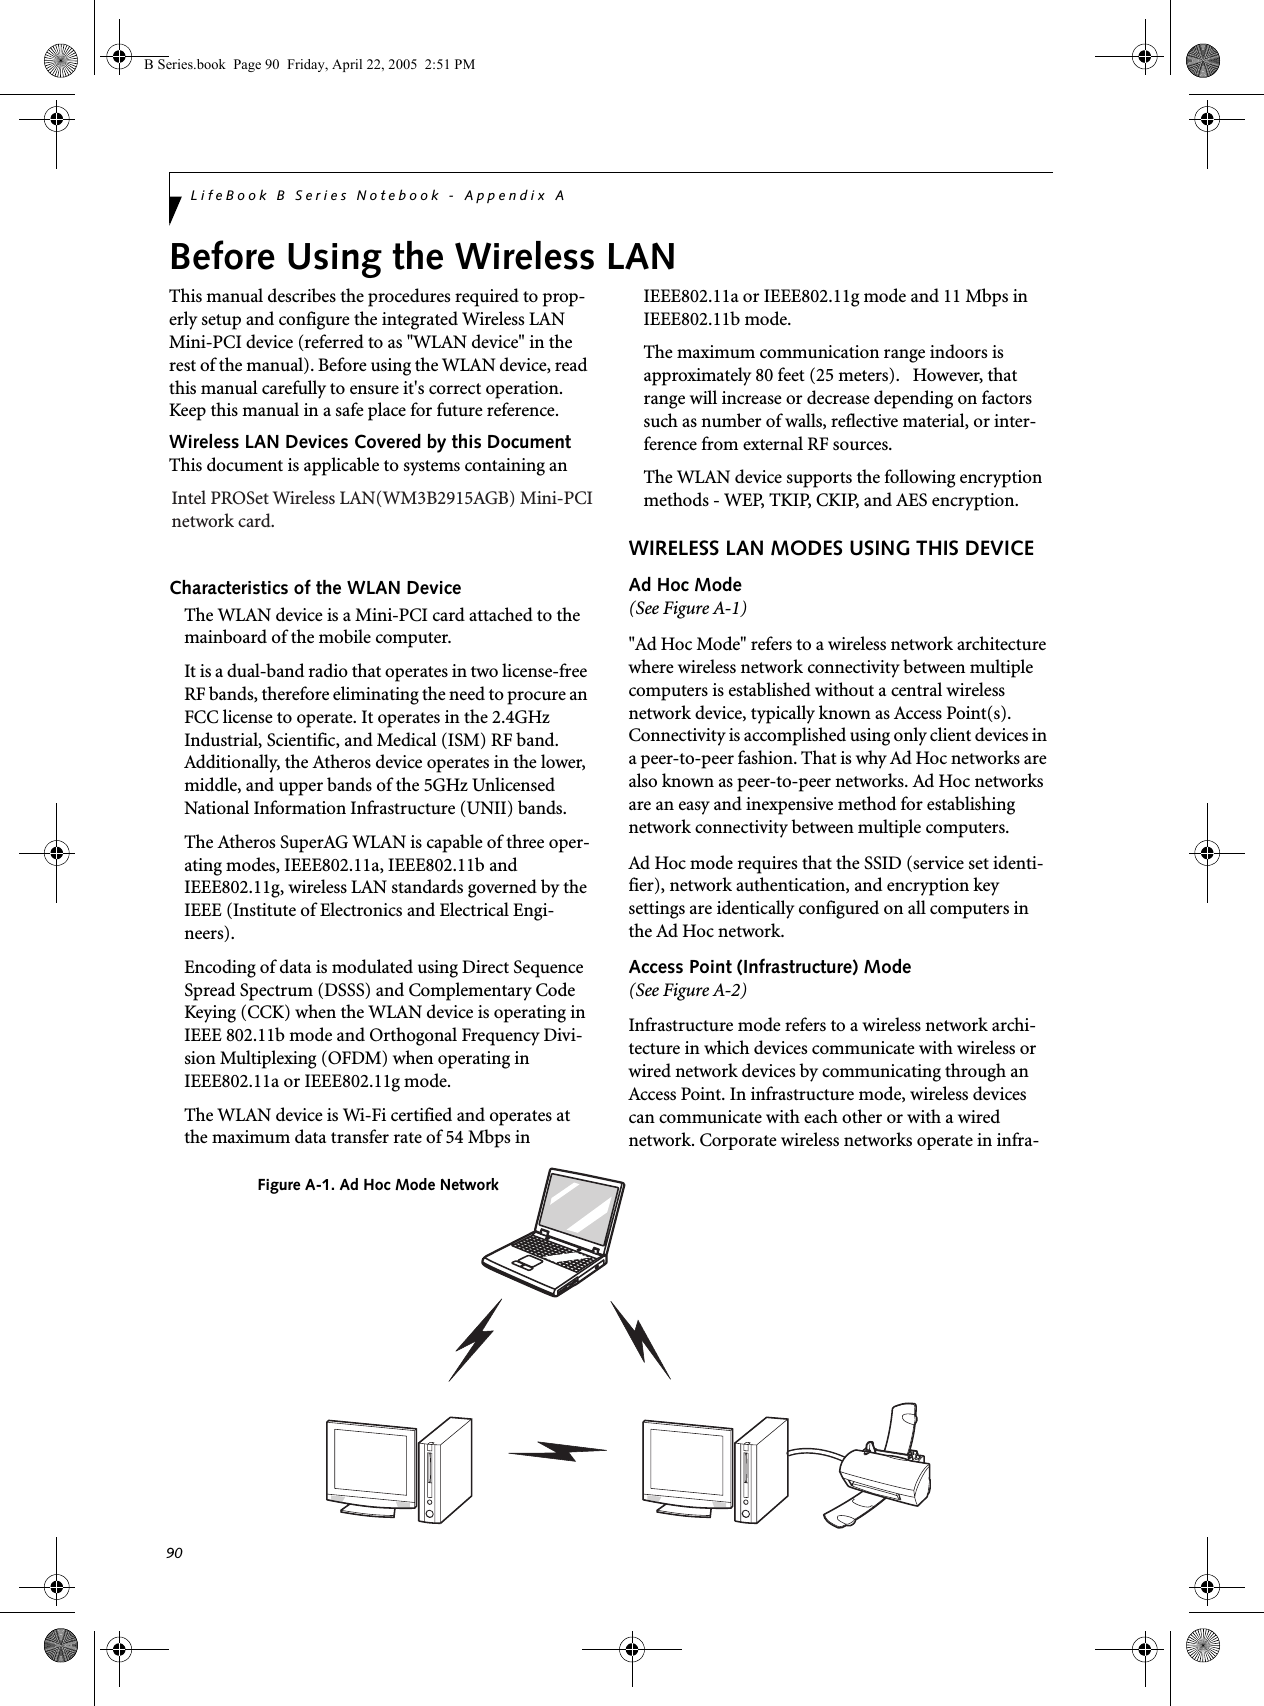 90LifeBook B Series Notebook - Appendix ABefore Using the Wireless LANThis manual describes the procedures required to prop-erly setup and configure the integrated Wireless LAN Mini-PCI device (referred to as &quot;WLAN device&quot; in the rest of the manual). Before using the WLAN device, read this manual carefully to ensure it&apos;s correct operation. Keep this manual in a safe place for future reference.Wireless LAN Devices Covered by this DocumentThis document is applicable to systems containing anCharacteristics of the WLAN DeviceThe WLAN device is a Mini-PCI card attached to the mainboard of the mobile computer. It is a dual-band radio that operates in two license-free RF bands, therefore eliminating the need to procure an FCC license to operate. It operates in the 2.4GHz Industrial, Scientific, and Medical (ISM) RF band. Additionally, the Atheros device operates in the lower, middle, and upper bands of the 5GHz Unlicensed National Information Infrastructure (UNII) bands. The Atheros SuperAG WLAN is capable of three oper-ating modes, IEEE802.11a, IEEE802.11b and IEEE802.11g, wireless LAN standards governed by the IEEE (Institute of Electronics and Electrical Engi-neers). Encoding of data is modulated using Direct Sequence Spread Spectrum (DSSS) and Complementary Code Keying (CCK) when the WLAN device is operating in IEEE 802.11b mode and Orthogonal Frequency Divi-sion Multiplexing (OFDM) when operating in IEEE802.11a or IEEE802.11g mode. The WLAN device is Wi-Fi certified and operates at the maximum data transfer rate of 54 Mbps in IEEE802.11a or IEEE802.11g mode and 11 Mbps in IEEE802.11b mode.The maximum communication range indoors is approximately 80 feet (25 meters).   However, that range will increase or decrease depending on factors such as number of walls, reflective material, or inter-ference from external RF sources.The WLAN device supports the following encryption methods - WEP, TKIP, CKIP, and AES encryption.WIRELESS LAN MODES USING THIS DEVICEAd Hoc Mode (See Figure A-1)&quot;Ad Hoc Mode&quot; refers to a wireless network architecture where wireless network connectivity between multiple computers is established without a central wireless network device, typically known as Access Point(s). Connectivity is accomplished using only client devices in a peer-to-peer fashion. That is why Ad Hoc networks are also known as peer-to-peer networks. Ad Hoc networks are an easy and inexpensive method for establishing network connectivity between multiple computers.Ad Hoc mode requires that the SSID (service set identi-fier), network authentication, and encryption key settings are identically configured on all computers in the Ad Hoc network.  Access Point (Infrastructure) Mode (See Figure A-2)Infrastructure mode refers to a wireless network archi-tecture in which devices communicate with wireless or wired network devices by communicating through an Access Point. In infrastructure mode, wireless devices can communicate with each other or with a wired network. Corporate wireless networks operate in infra-Figure A-1. Ad Hoc Mode NetworkB Series.book  Page 90  Friday, April 22, 2005  2:51 PMIntel PROSet Wireless LAN(WM3B2915AGB) Mini-PCInetwork card.